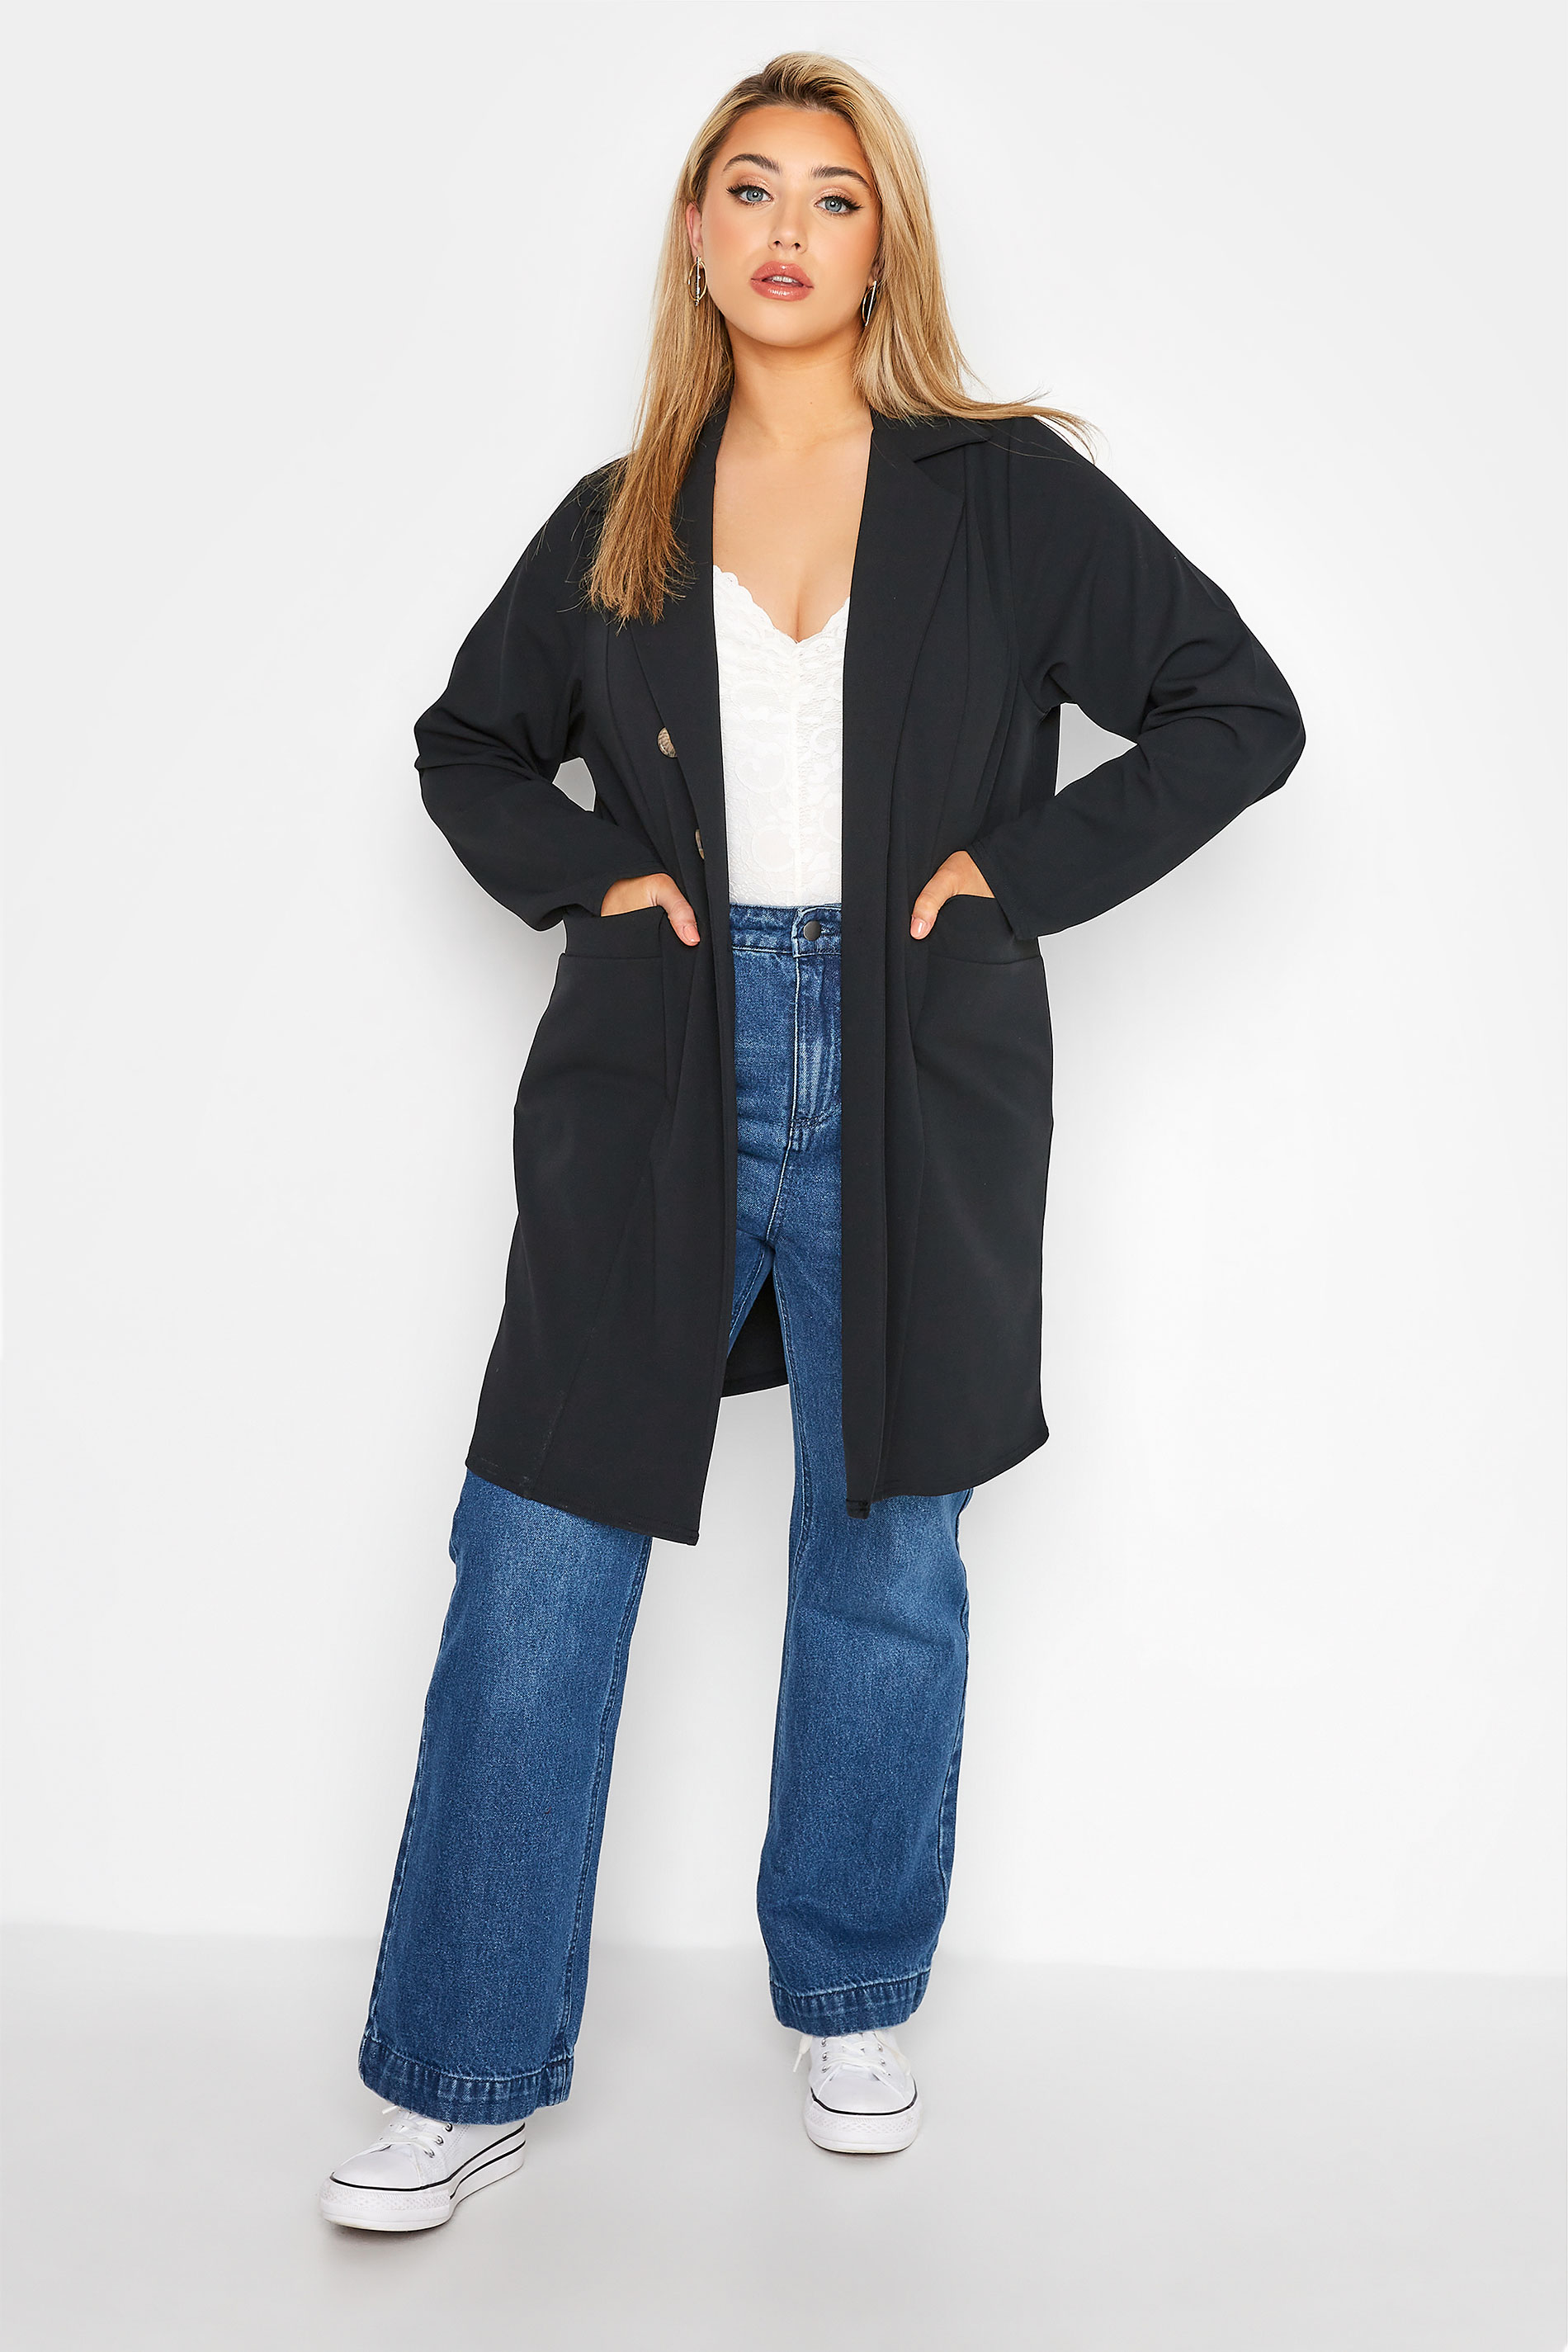 LIMITED COLLECTION Plus Size Black Button Front Blazer | Yours Clothing 3